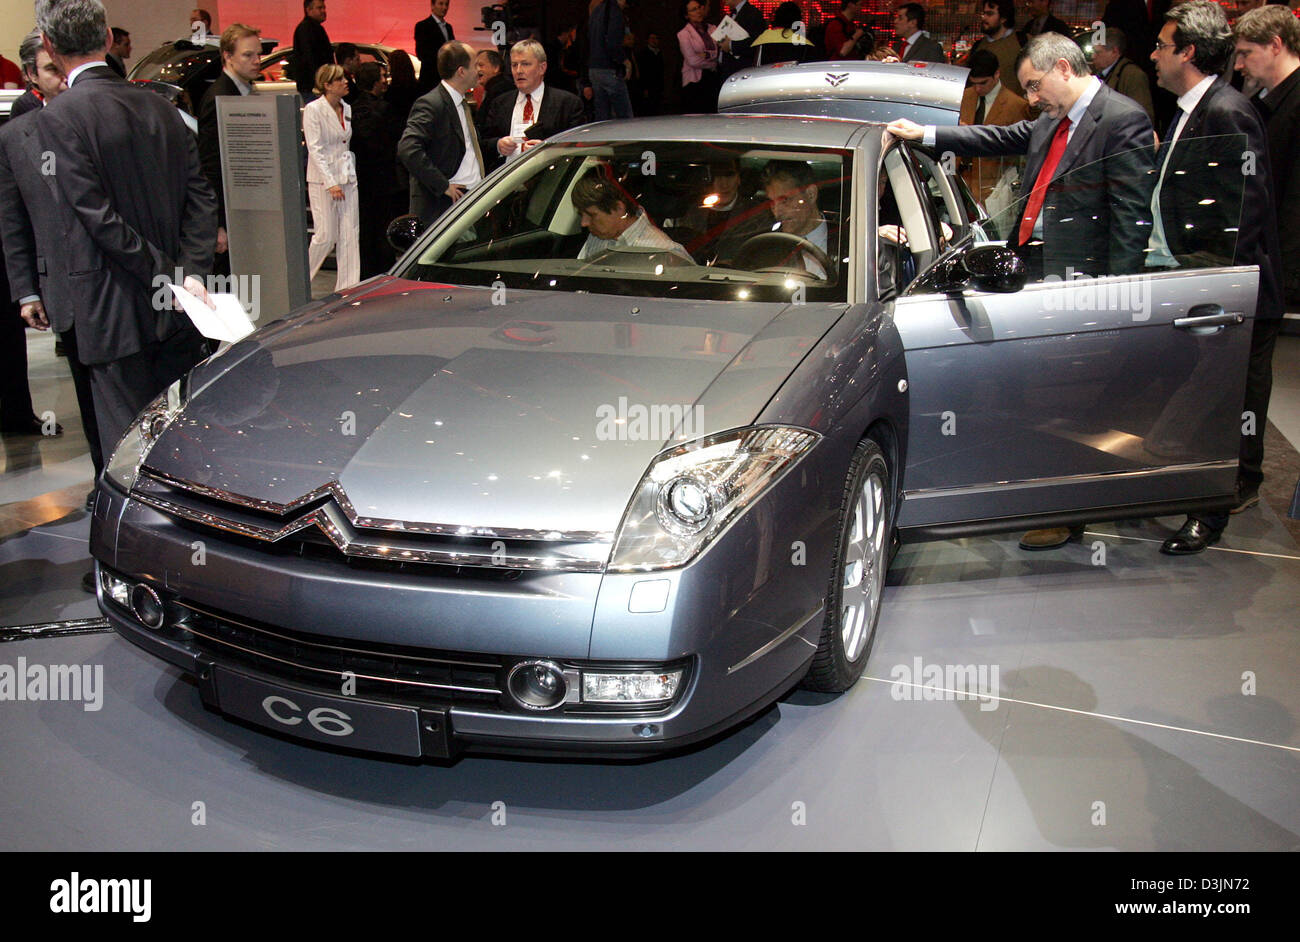 dpa) - Visitors examine the new Citroen C6 at the 'Autosalon', car  exhibition, in Geneva, Switzerland, Tuesday, 01 March 2005. The car will be  on sale in Germany from November 2005 onwards.